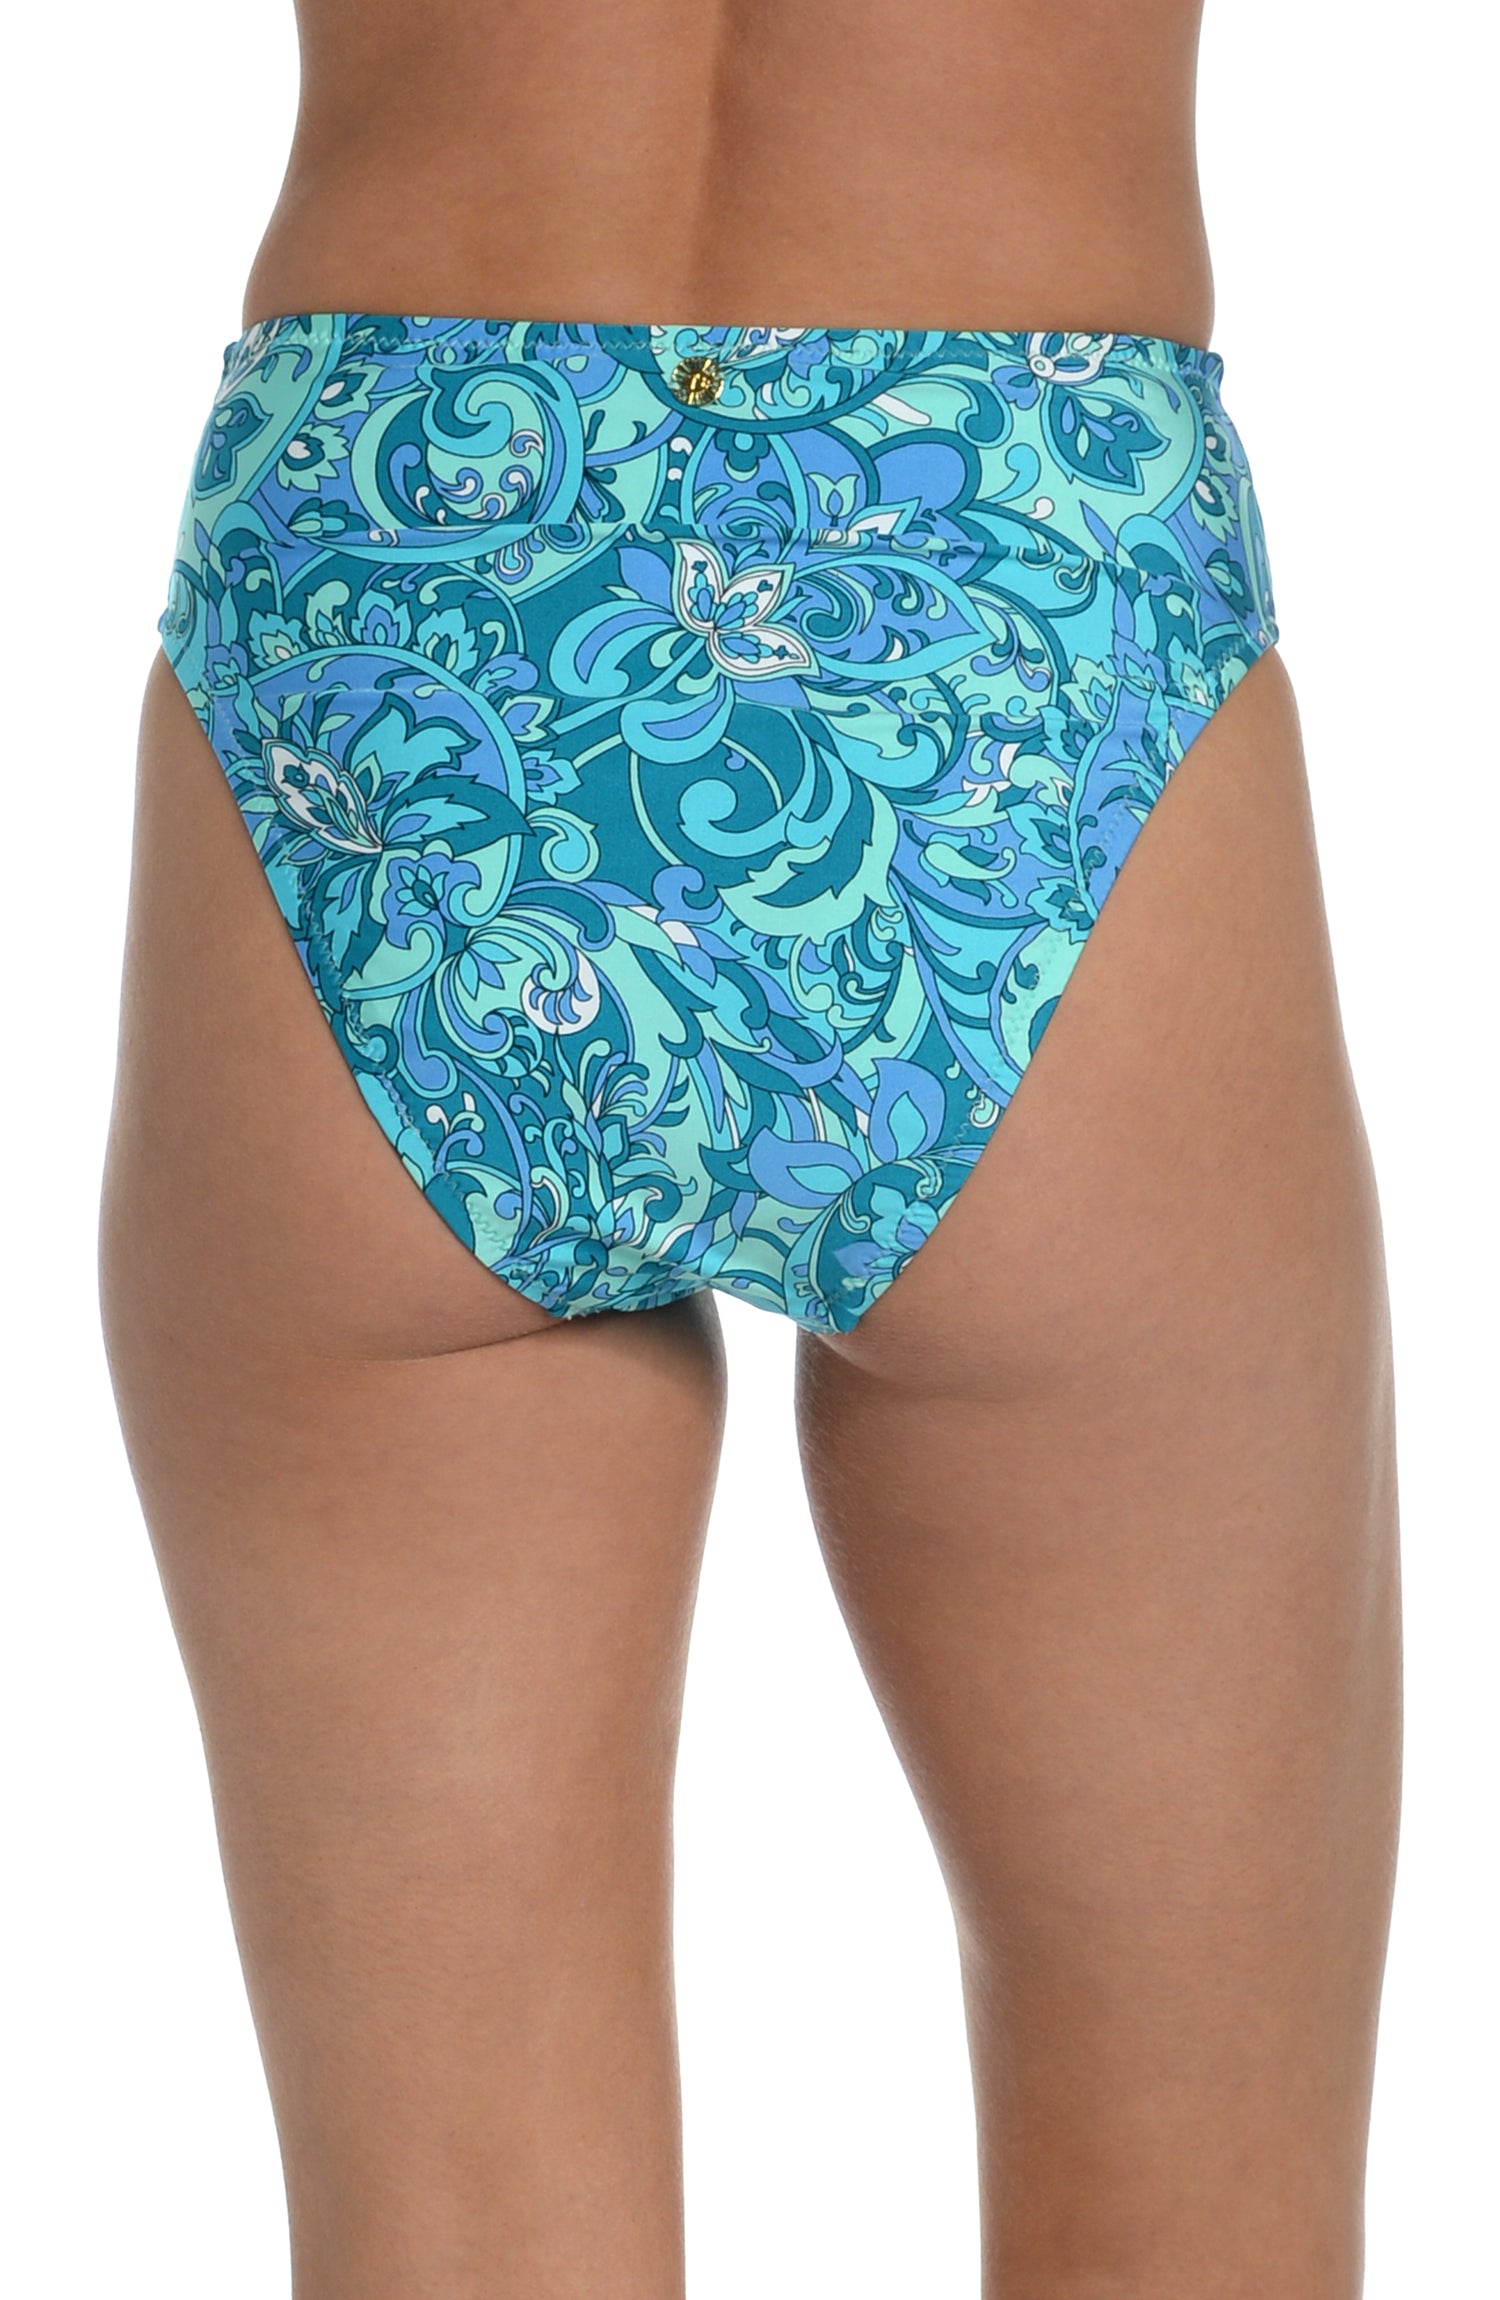 Model is wearing a teal blue bohemian printed high waist bikini bottom from our Boheme Paisley collection.